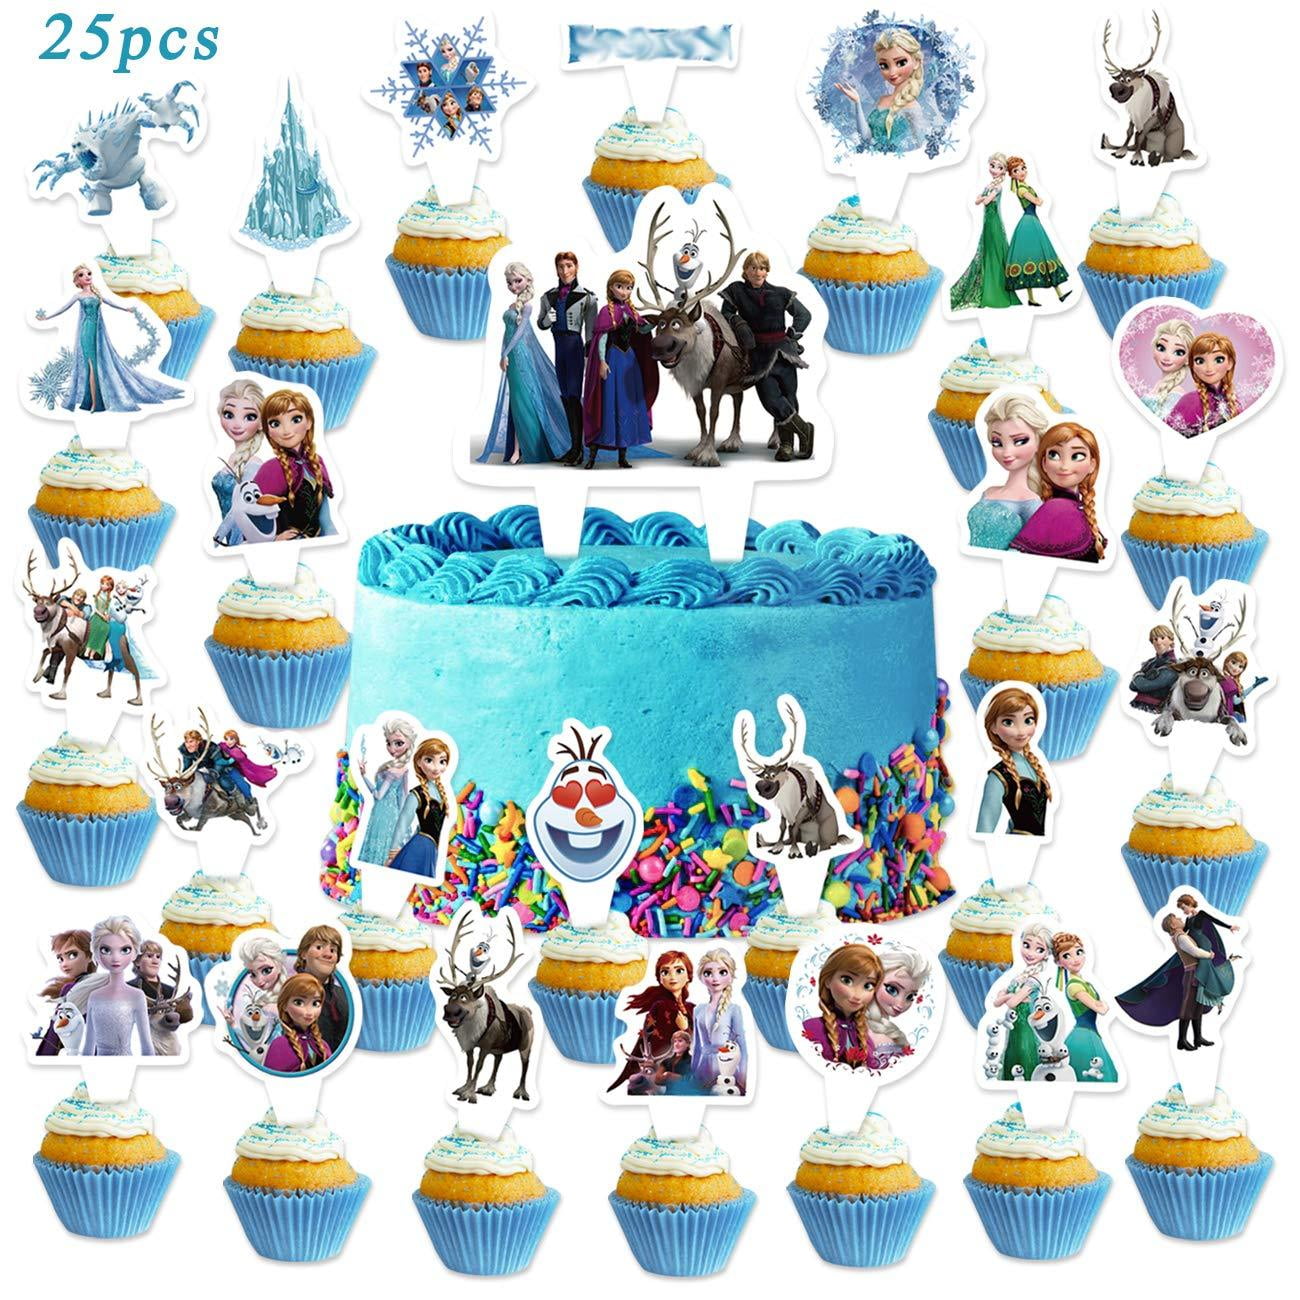 25pcs Disne_y Princess Cake Toppers Princess Cupcake Topper for Girls Happy Birthday Party Decorations Supplies 